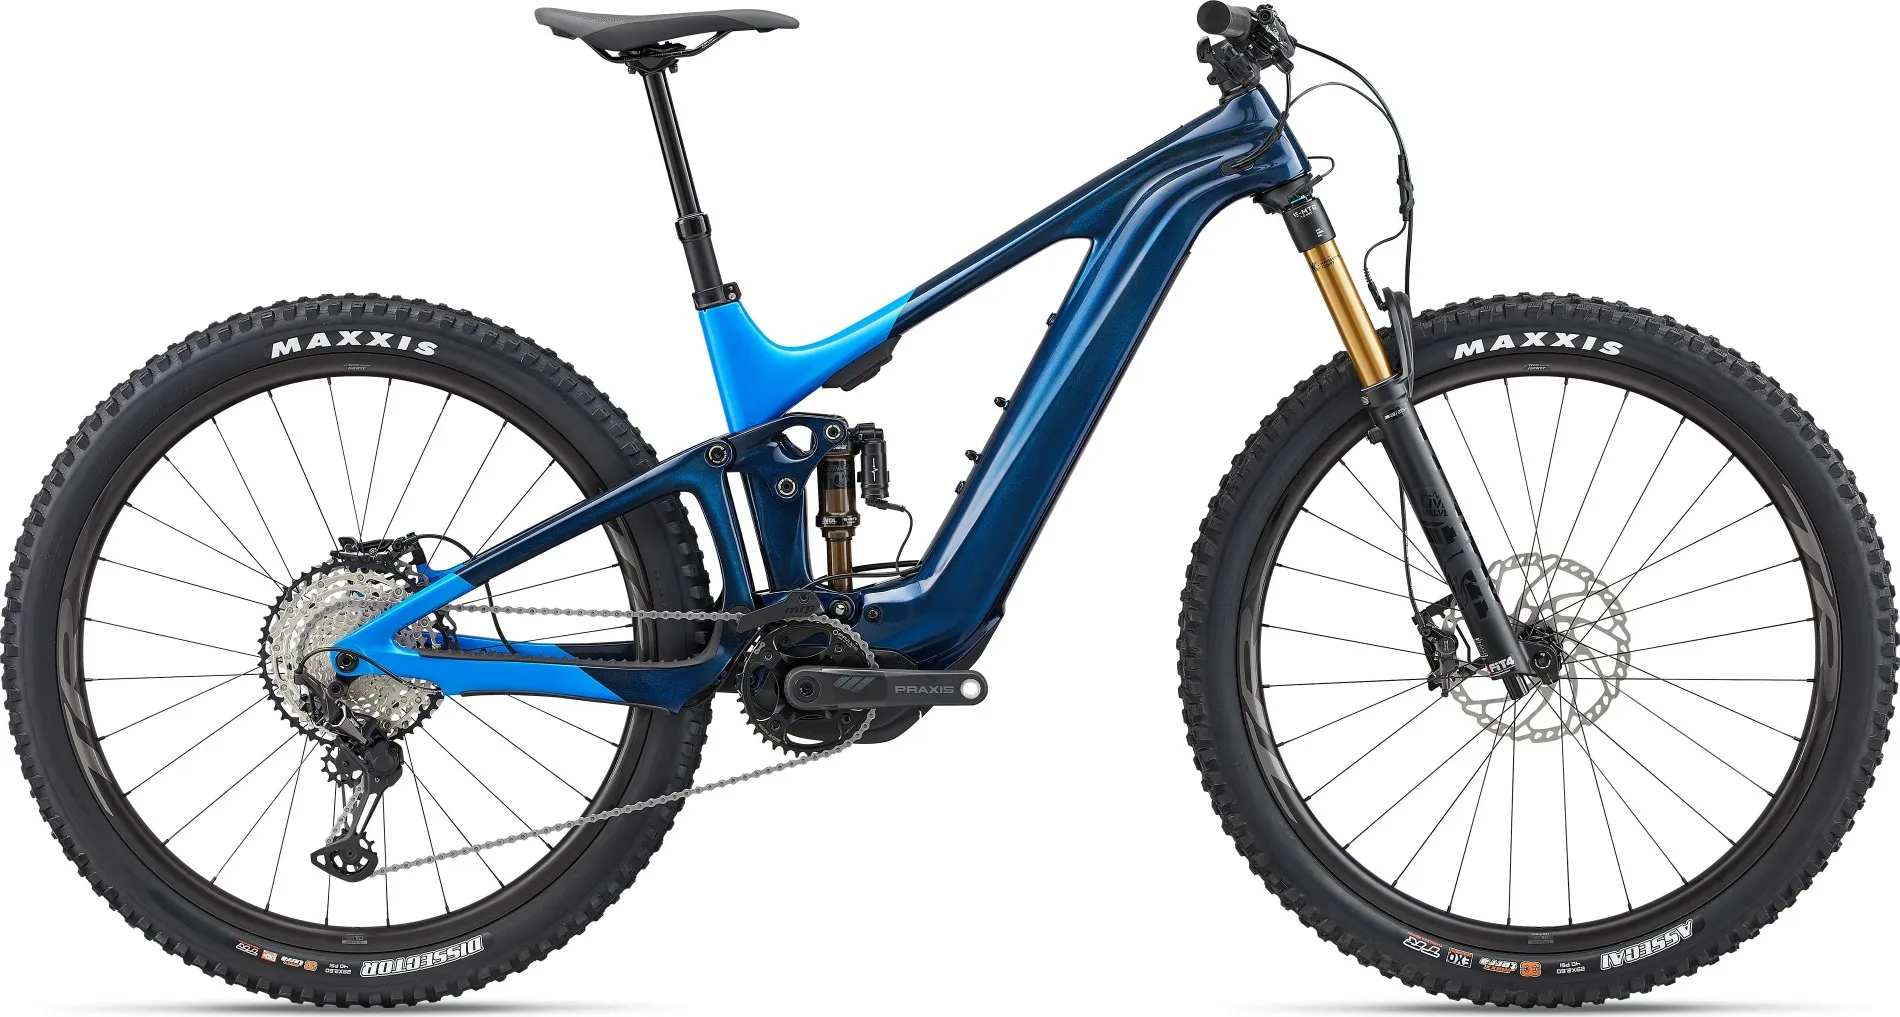 A trance x advanced e+ 0 bike in metallic navy color, equipped with maxxis tires on both the front and back wheels.